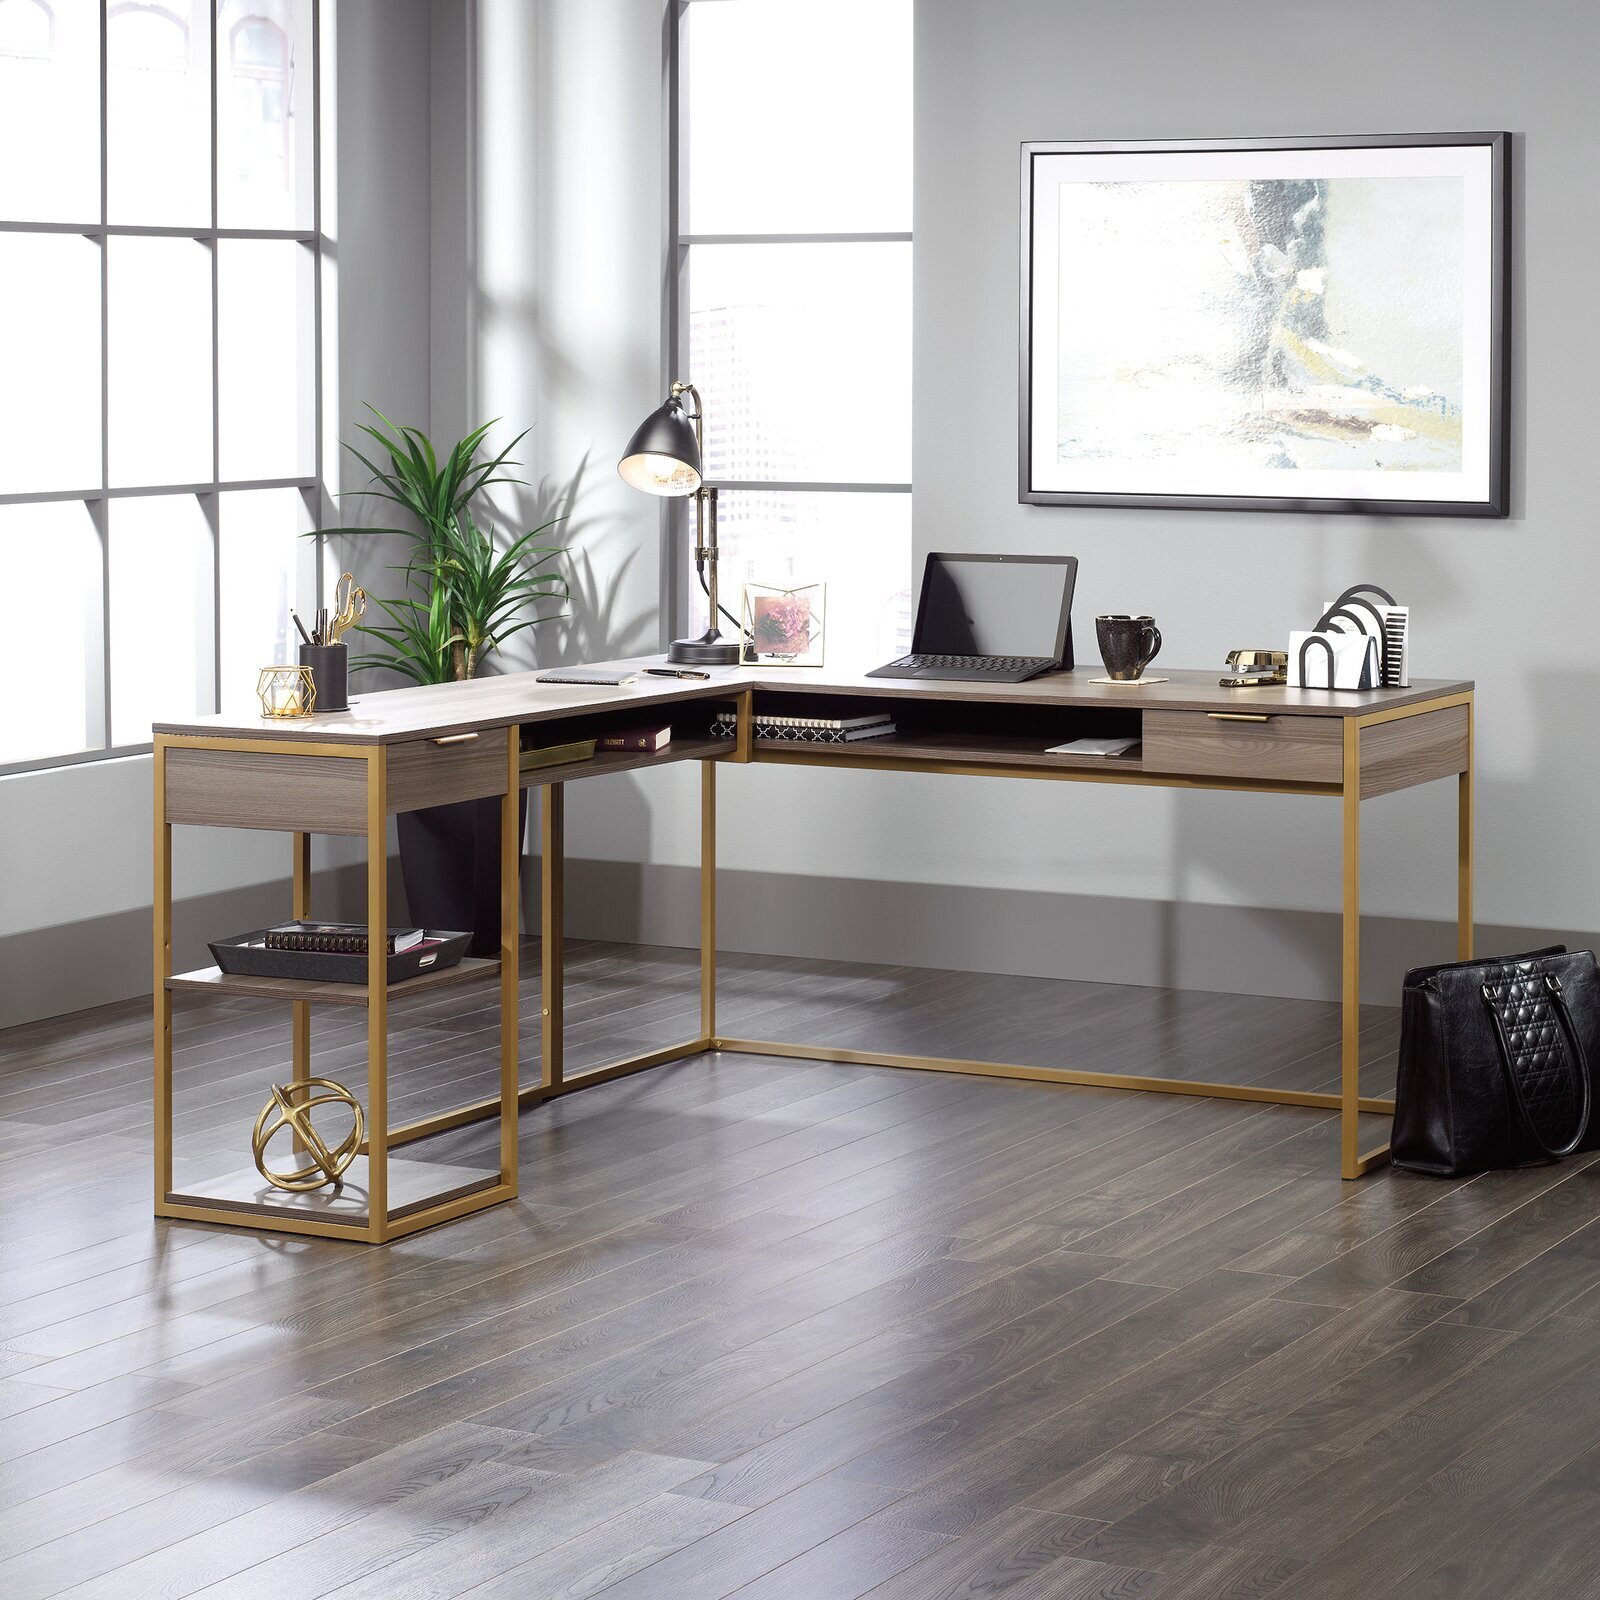 Minimalist L Shape Table for Office